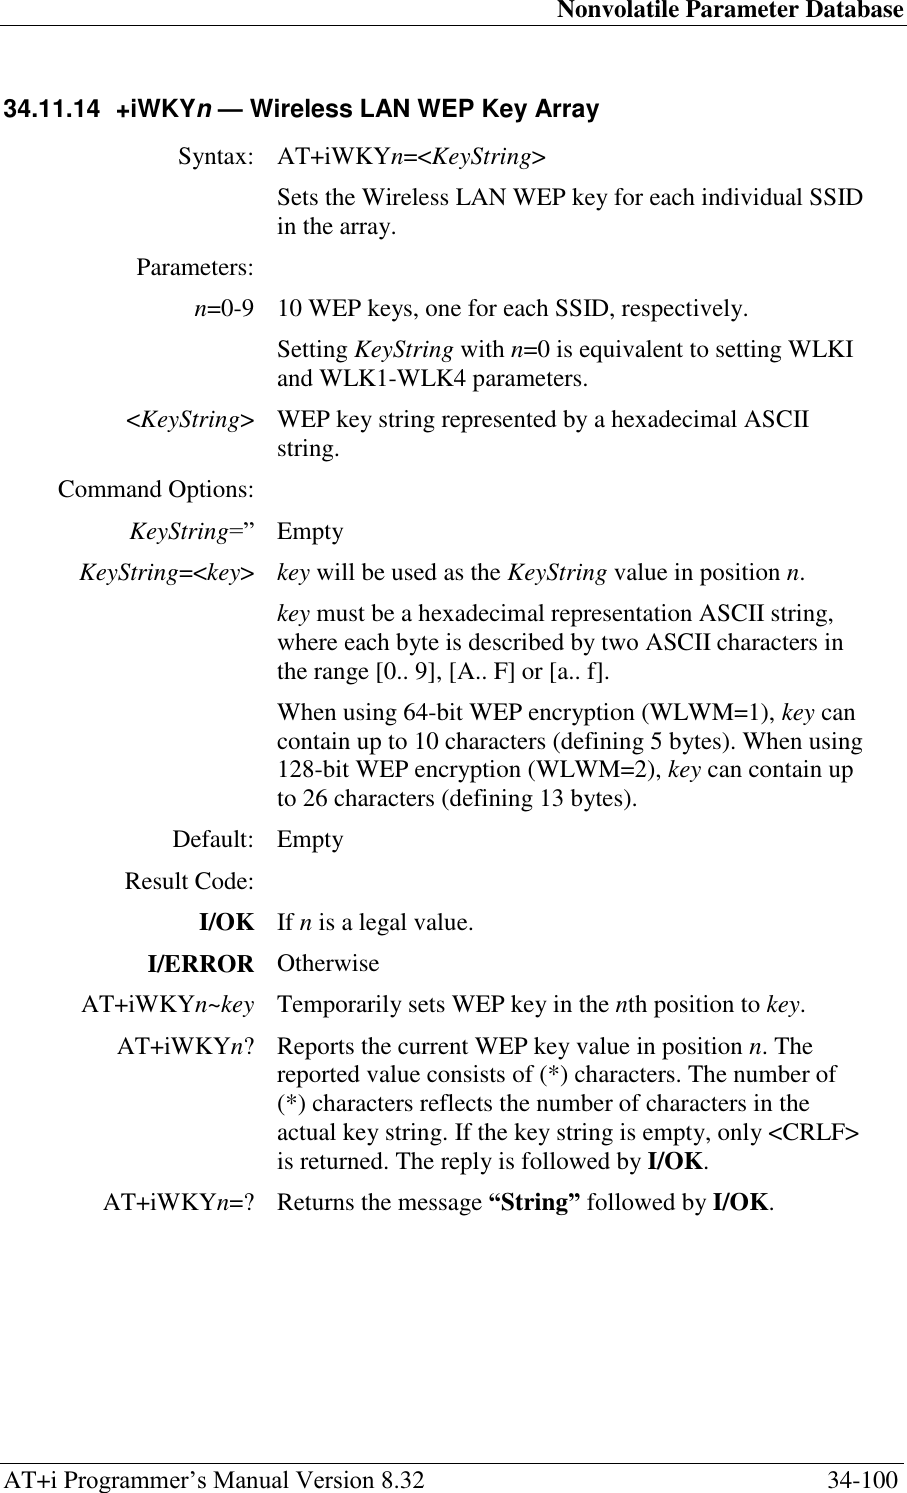 Nonvolatile Parameter Database AT+i Programmer‘s Manual Version 8.32  34-100 34.11.14  +iWKYn — Wireless LAN WEP Key Array   Syntax: AT+iWKYn=&lt;KeyString&gt;  Sets the Wireless LAN WEP key for each individual SSID in the array. Parameters:  n=0-9 10 WEP keys, one for each SSID, respectively. Setting KeyString with n=0 is equivalent to setting WLKI and WLK1-WLK4 parameters. &lt;KeyString&gt; WEP key string represented by a hexadecimal ASCII string. Command Options:  KeyString=‖ Empty KeyString=&lt;key&gt; key will be used as the KeyString value in position n. key must be a hexadecimal representation ASCII string, where each byte is described by two ASCII characters in the range [0.. 9], [A.. F] or [a.. f]. When using 64-bit WEP encryption (WLWM=1), key can contain up to 10 characters (defining 5 bytes). When using 128-bit WEP encryption (WLWM=2), key can contain up to 26 characters (defining 13 bytes). Default: Empty Result Code:  I/OK If n is a legal value. I/ERROR Otherwise AT+iWKYn~key Temporarily sets WEP key in the nth position to key. AT+iWKYn? Reports the current WEP key value in position n. The reported value consists of (*) characters. The number of (*) characters reflects the number of characters in the actual key string. If the key string is empty, only &lt;CRLF&gt; is returned. The reply is followed by I/OK. AT+iWKYn=? Returns the message “String” followed by I/OK. 